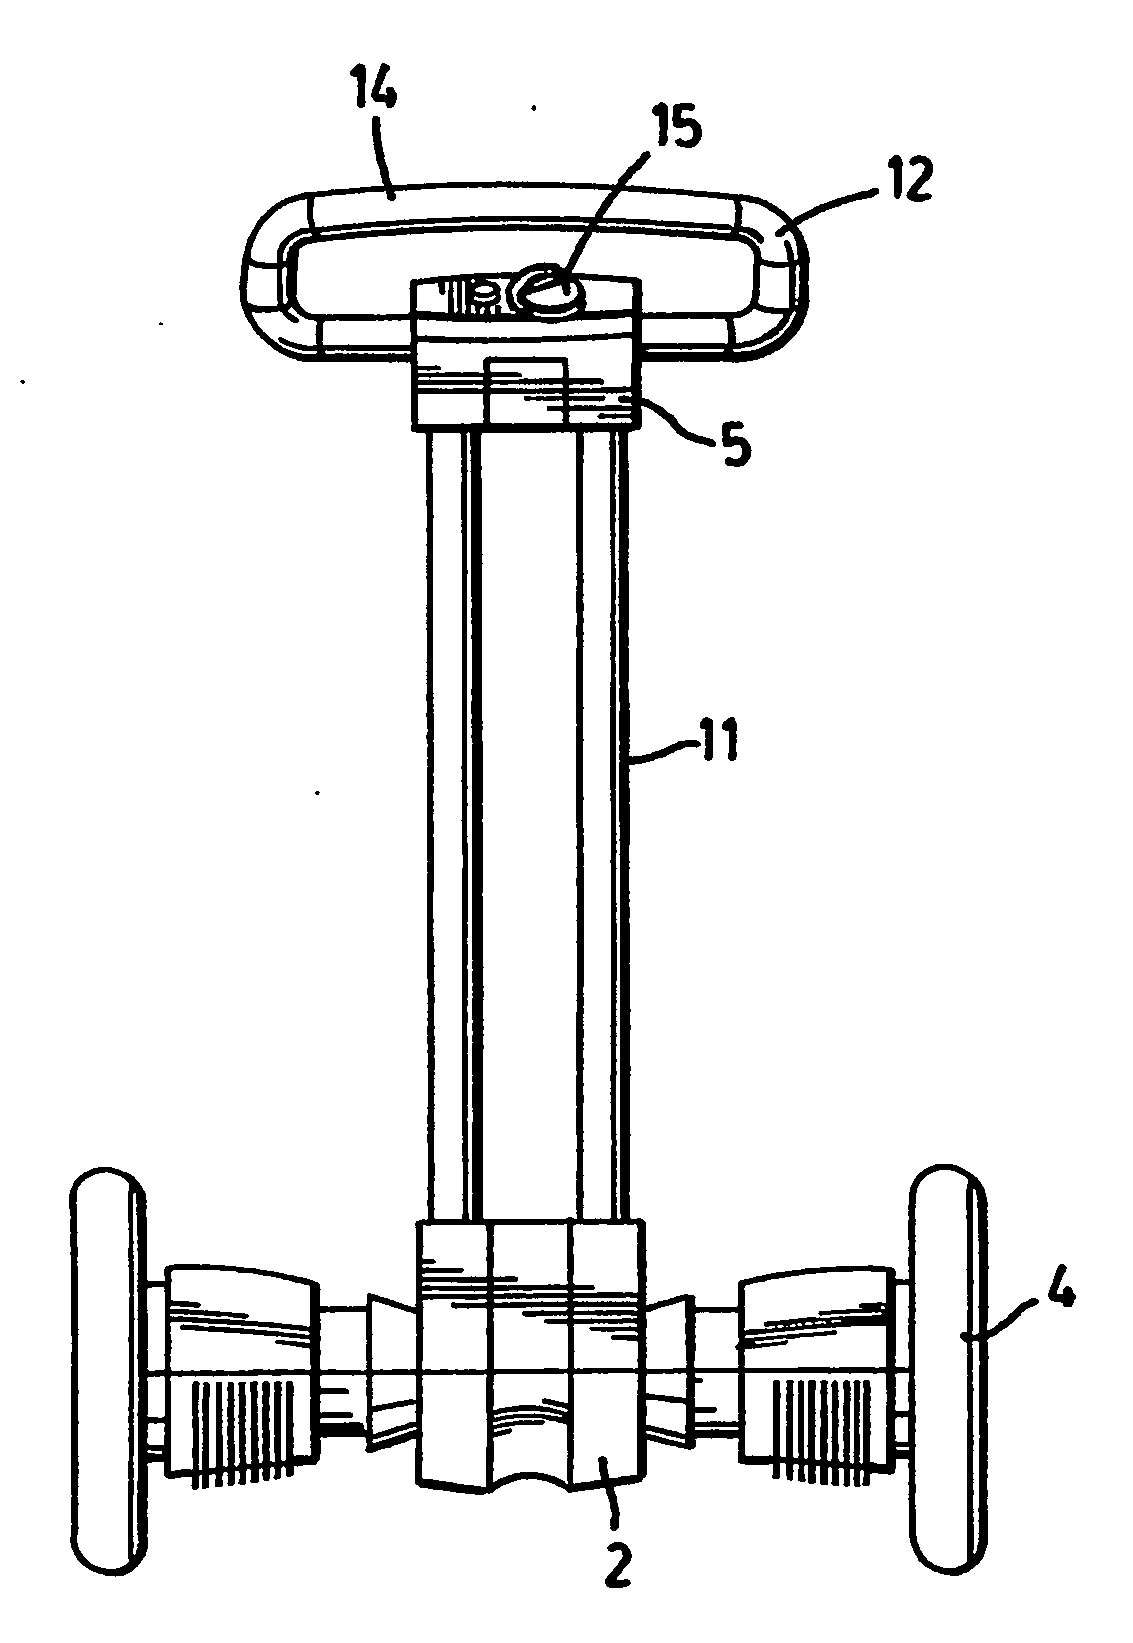 Motorized towing device